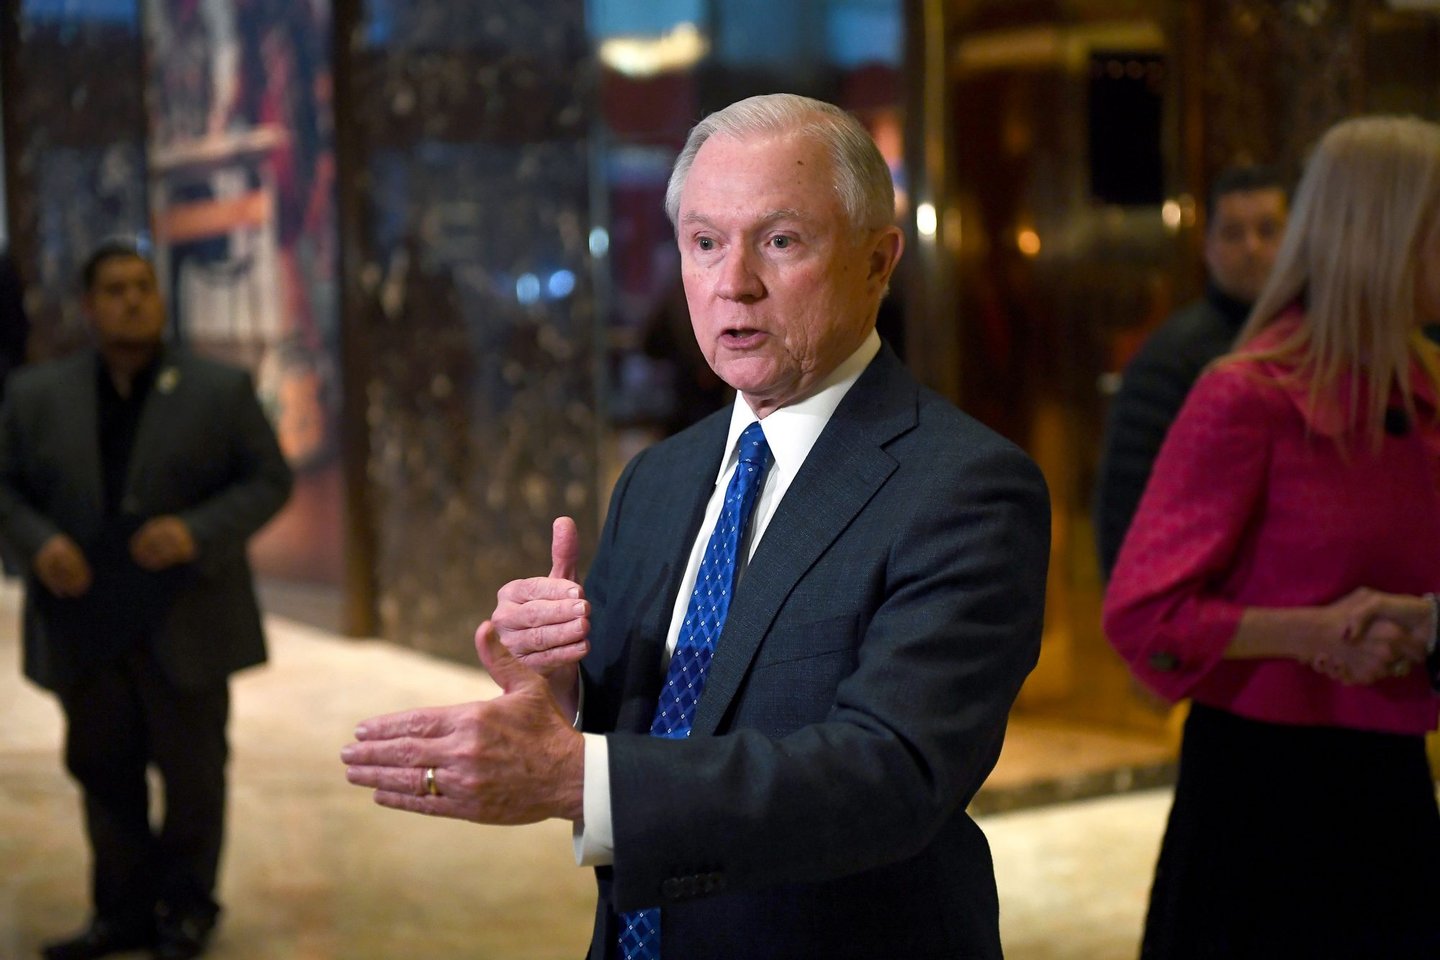 US Senator Jeff Sessions of Alabama talks to the media at the Trump Tower in New York on November 17, 2016. / AFP / Jewel SAMAD (Photo credit should read JEWEL SAMAD/AFP/Getty Images)